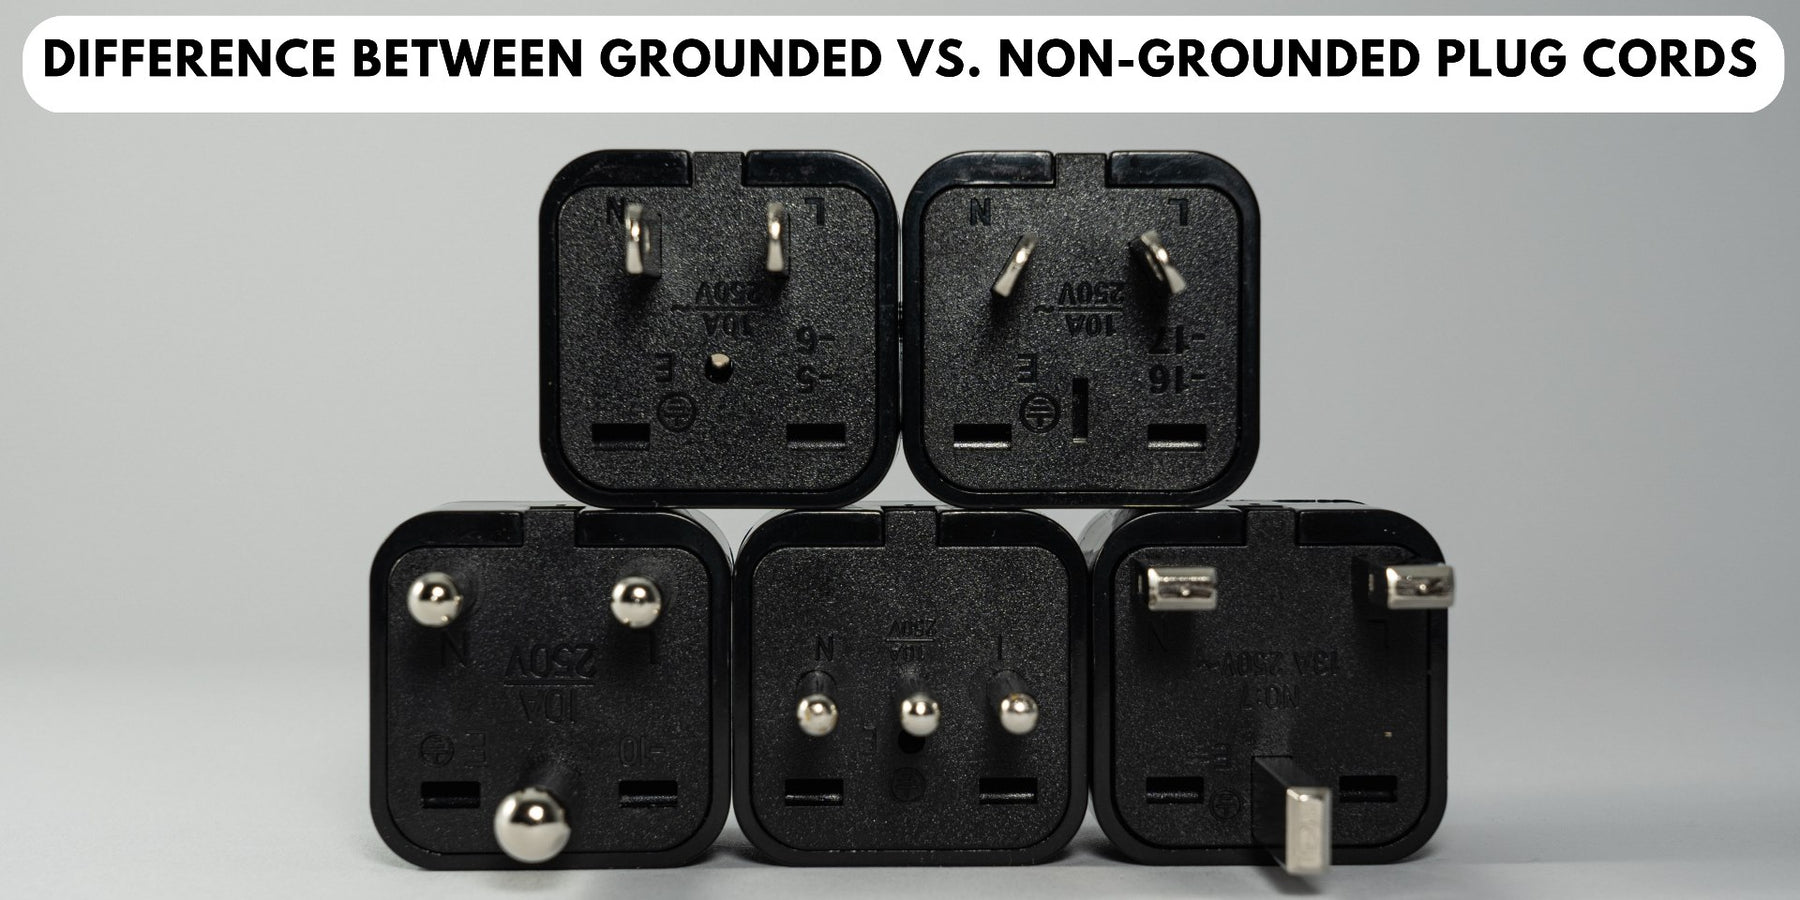 Difference Between Grounded Vs. Non-Grounded Plug Cords